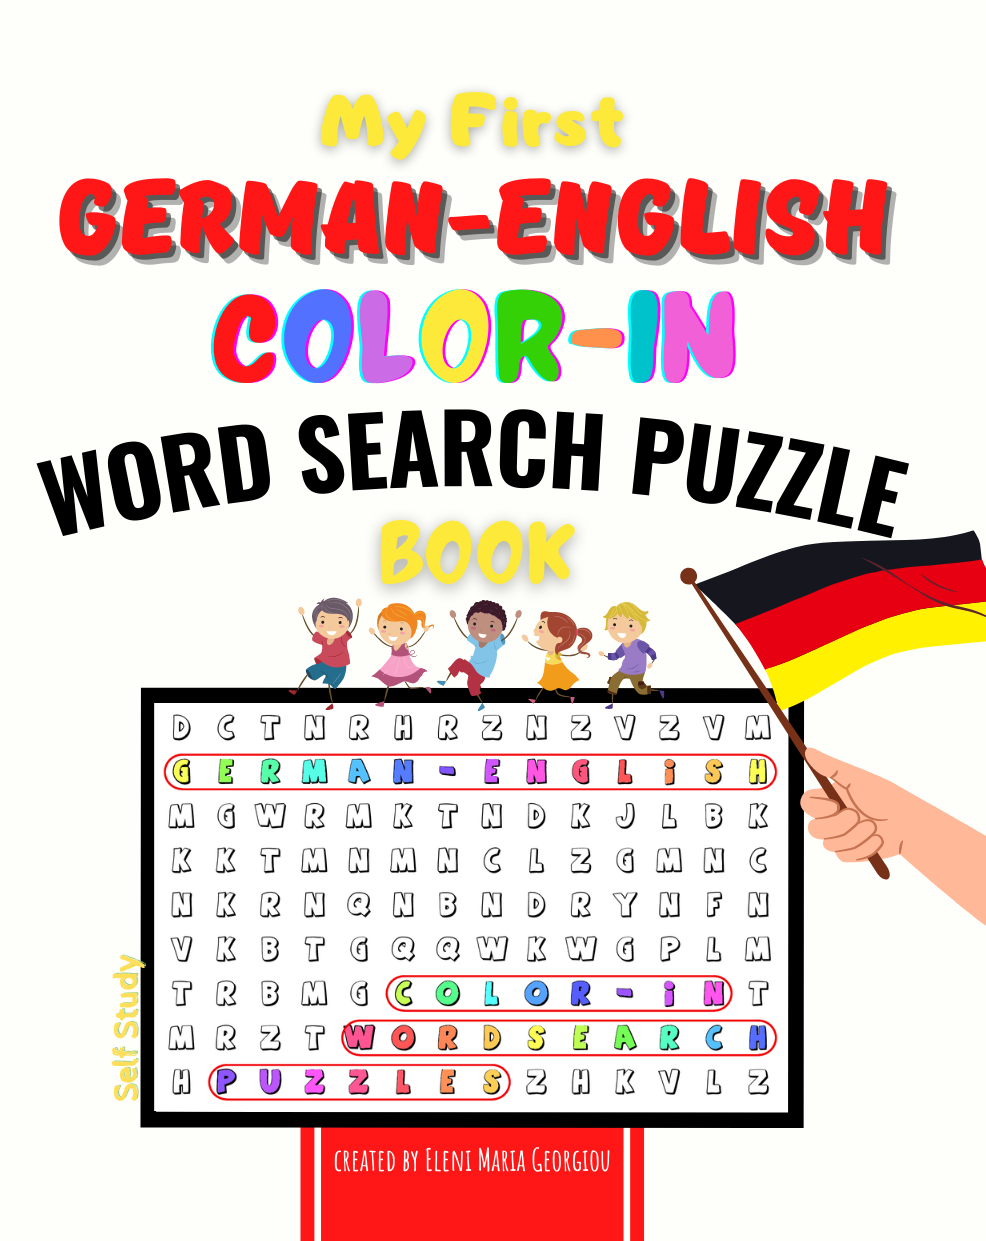 My First German-English Color-In Word Search Puzzle Book